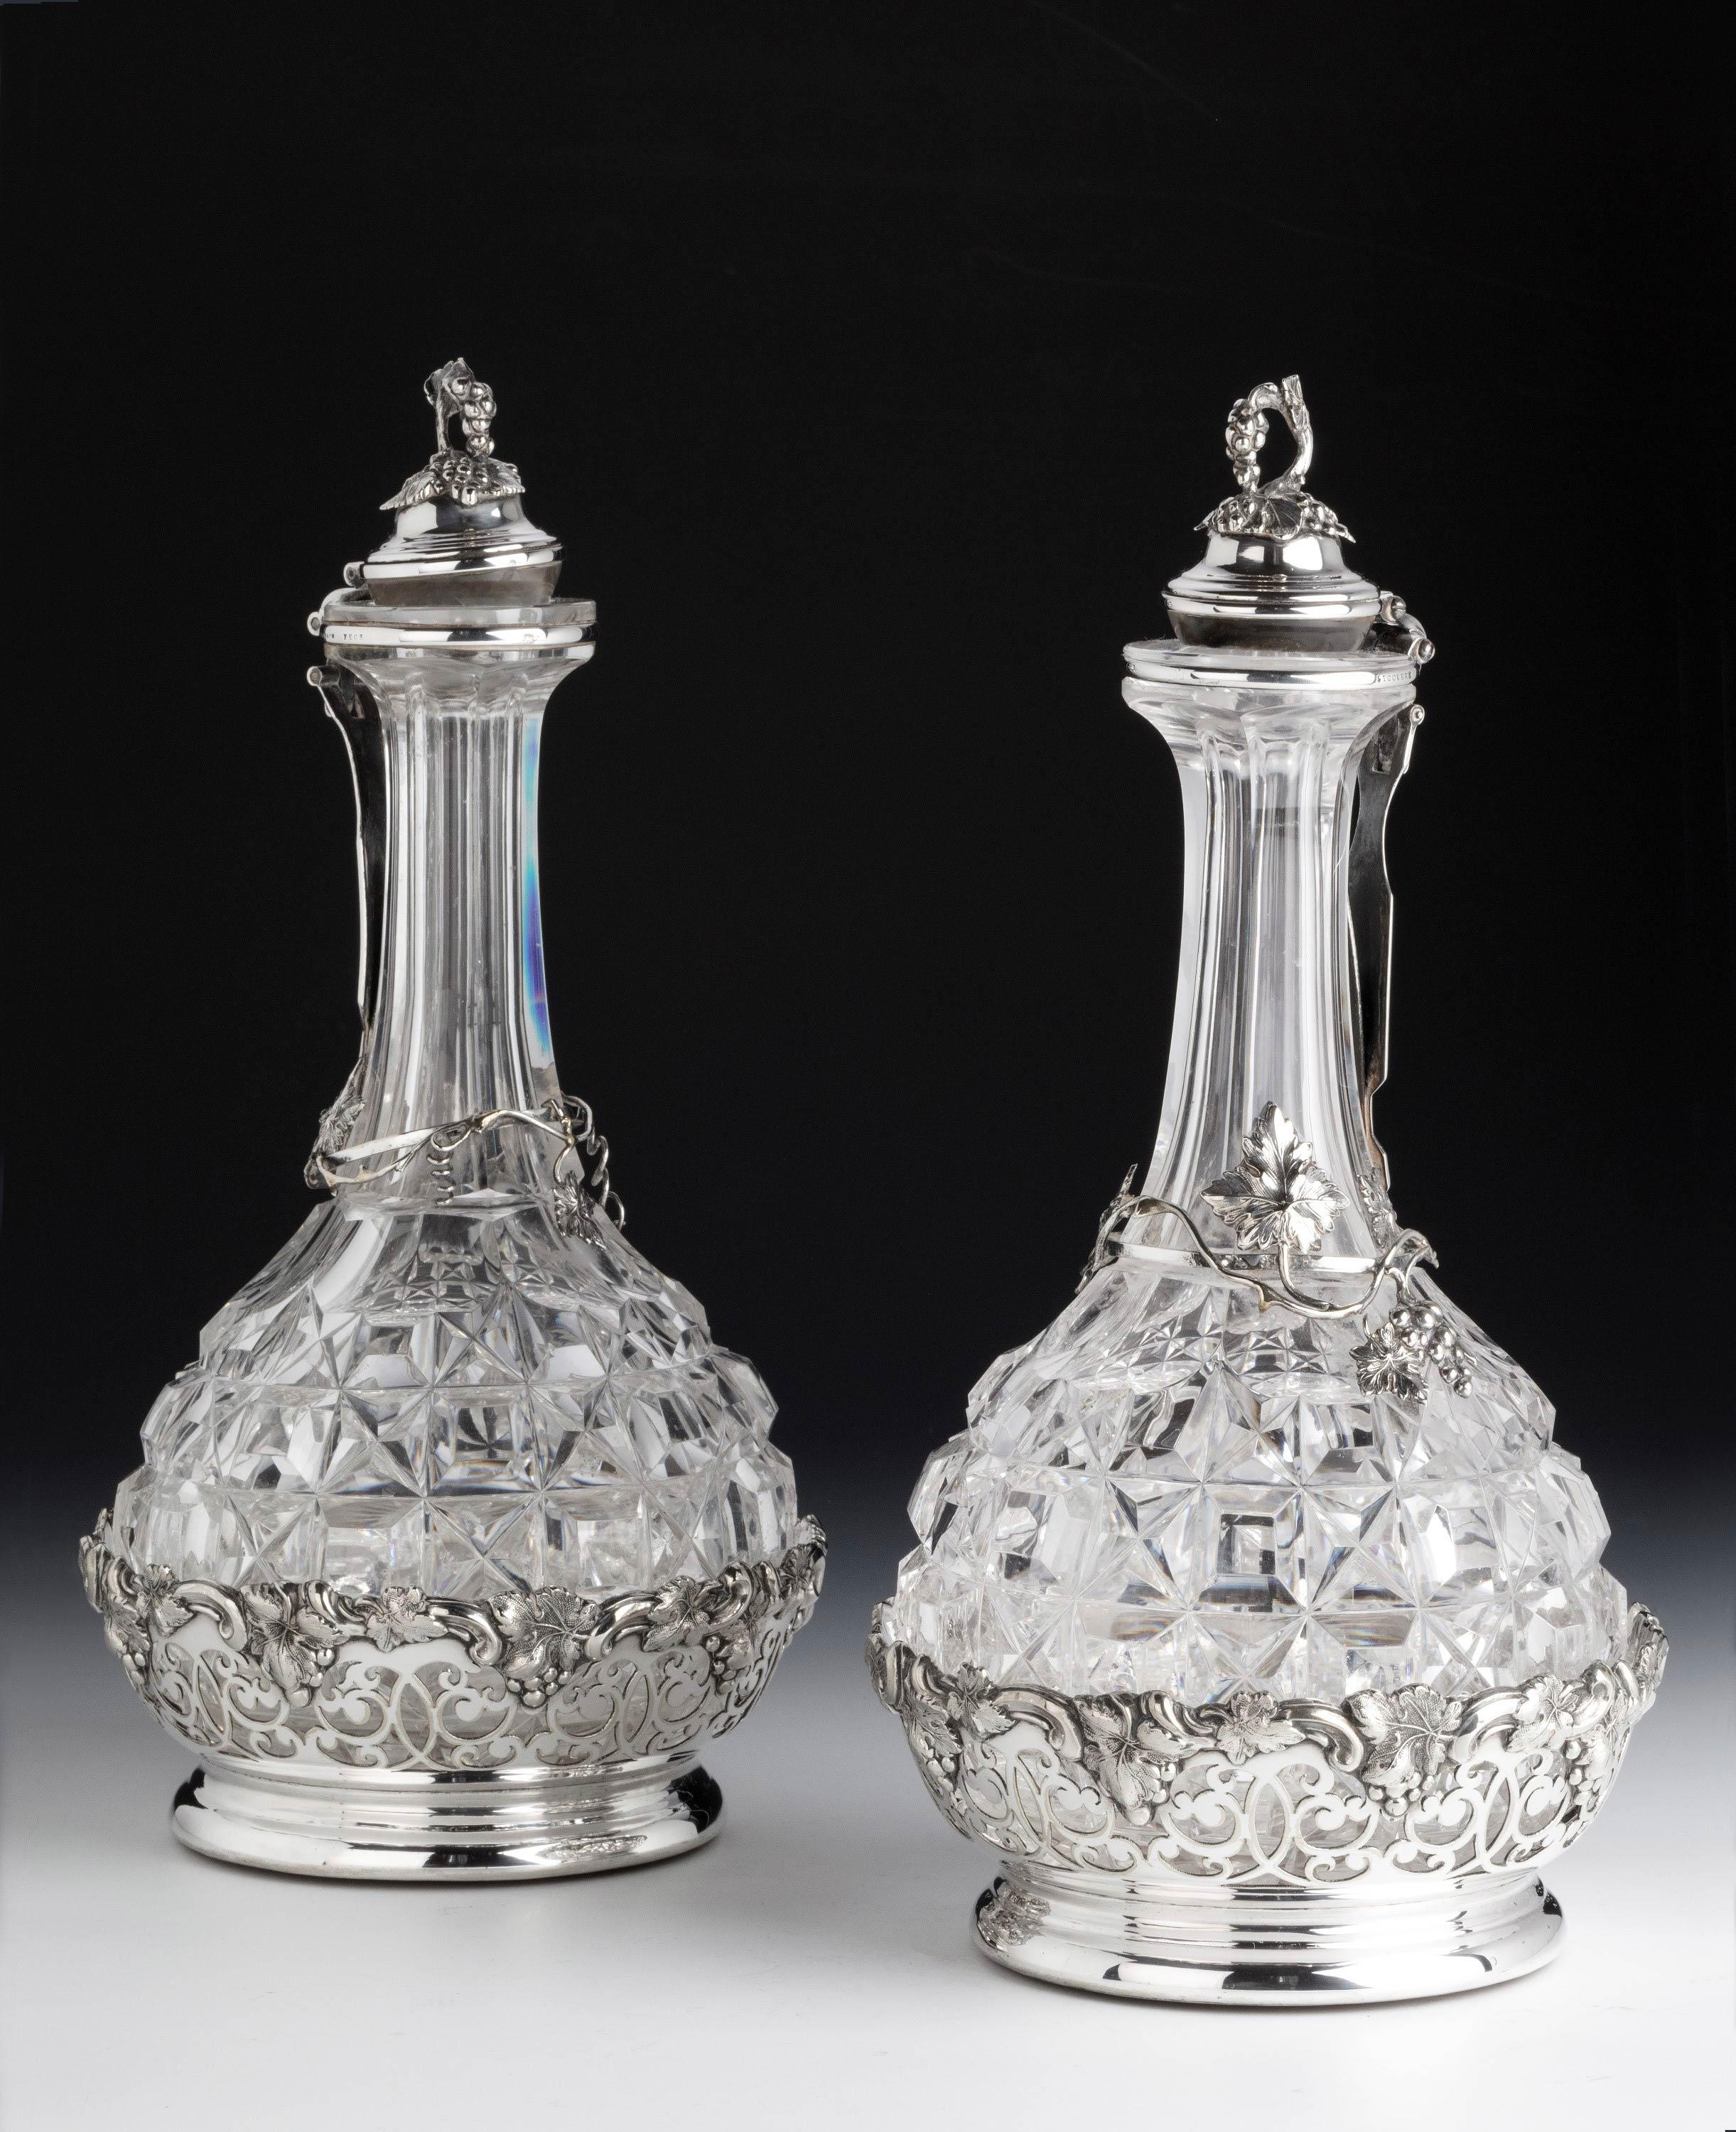 A very rare pair of heavily cut glass wine decanters in their original pierced and chiselled cradles. The tops cantilevered with ball-glass fittings. Of the very finest quality.